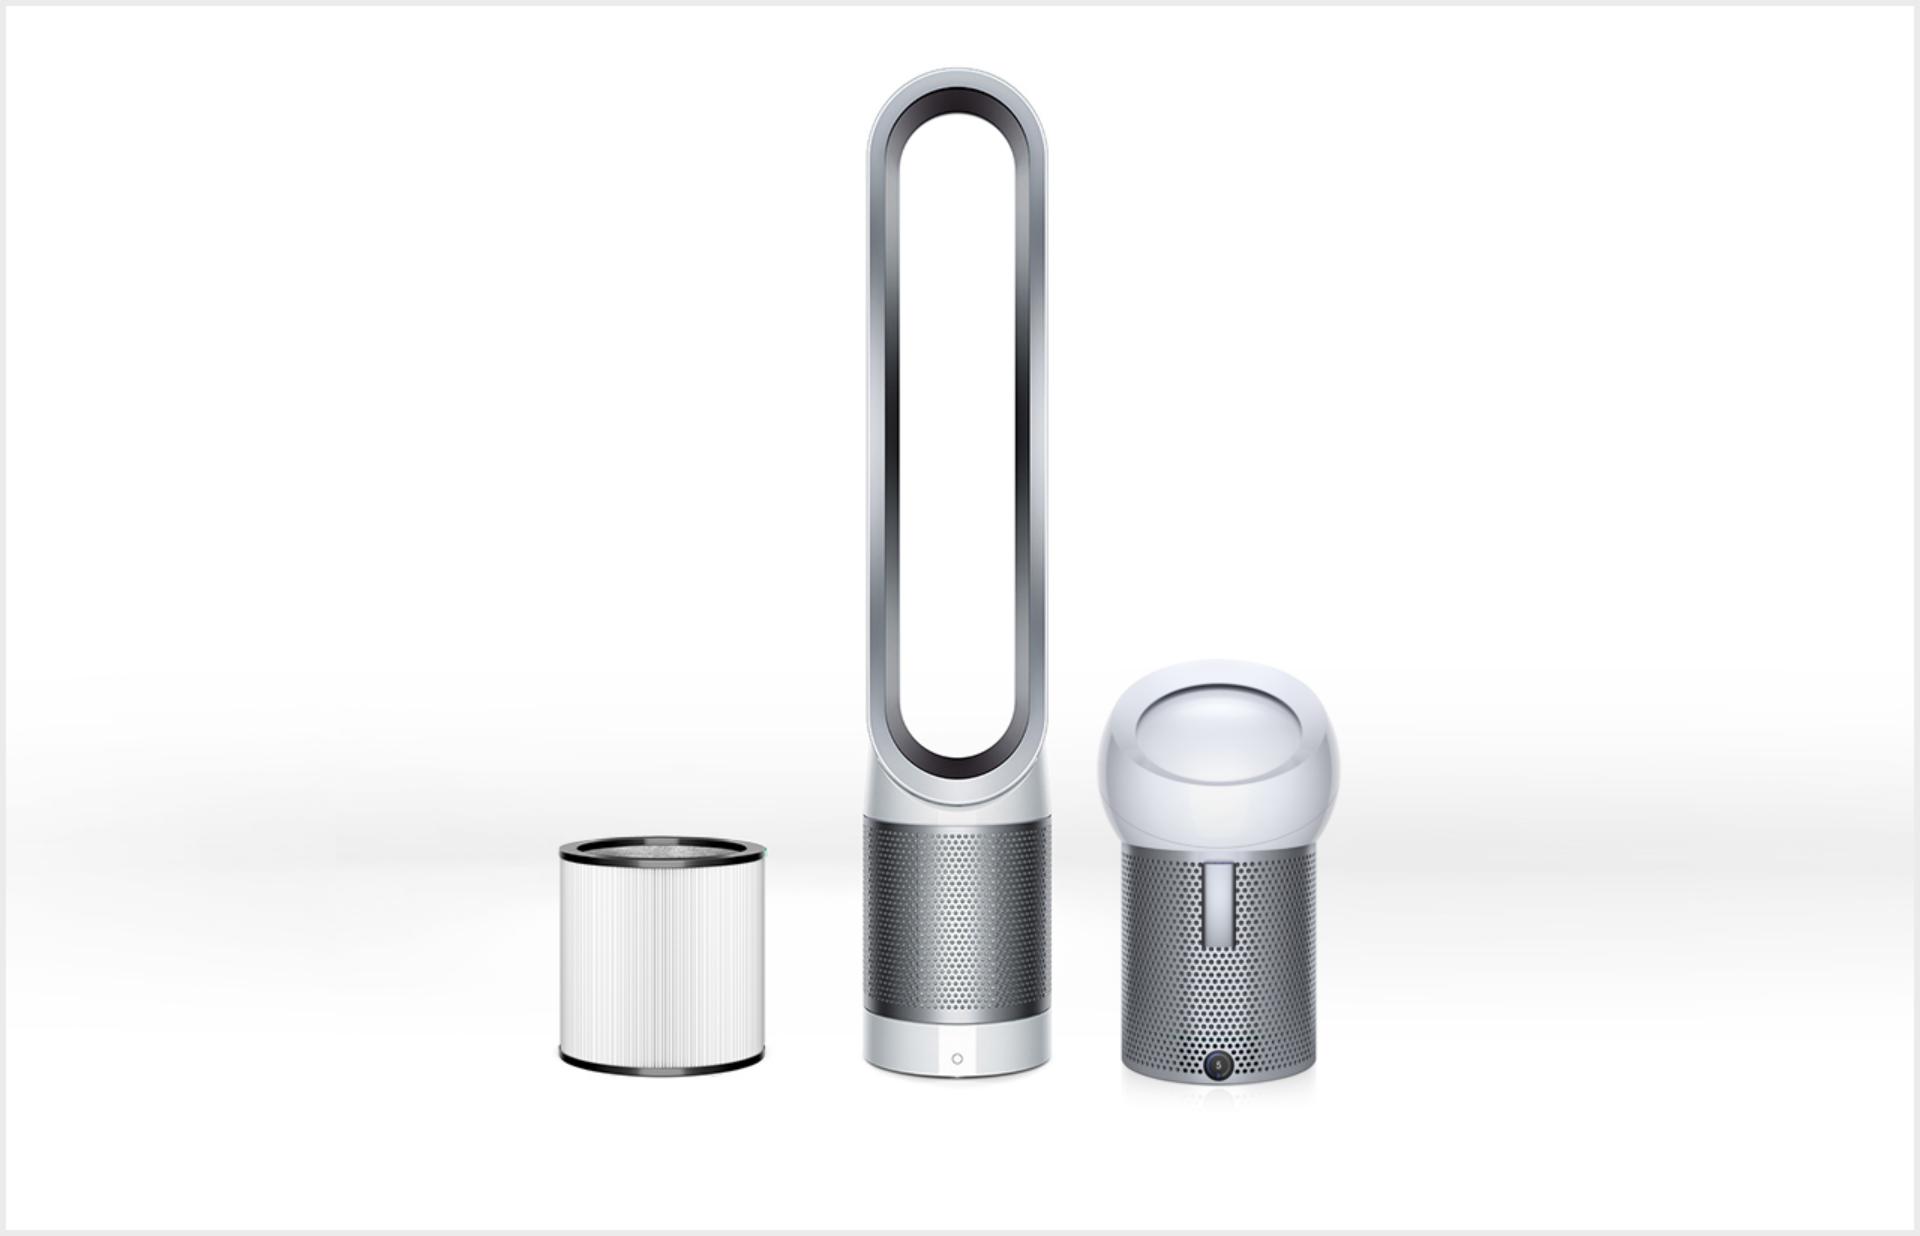 A Dyson purifier range in a row including a filter